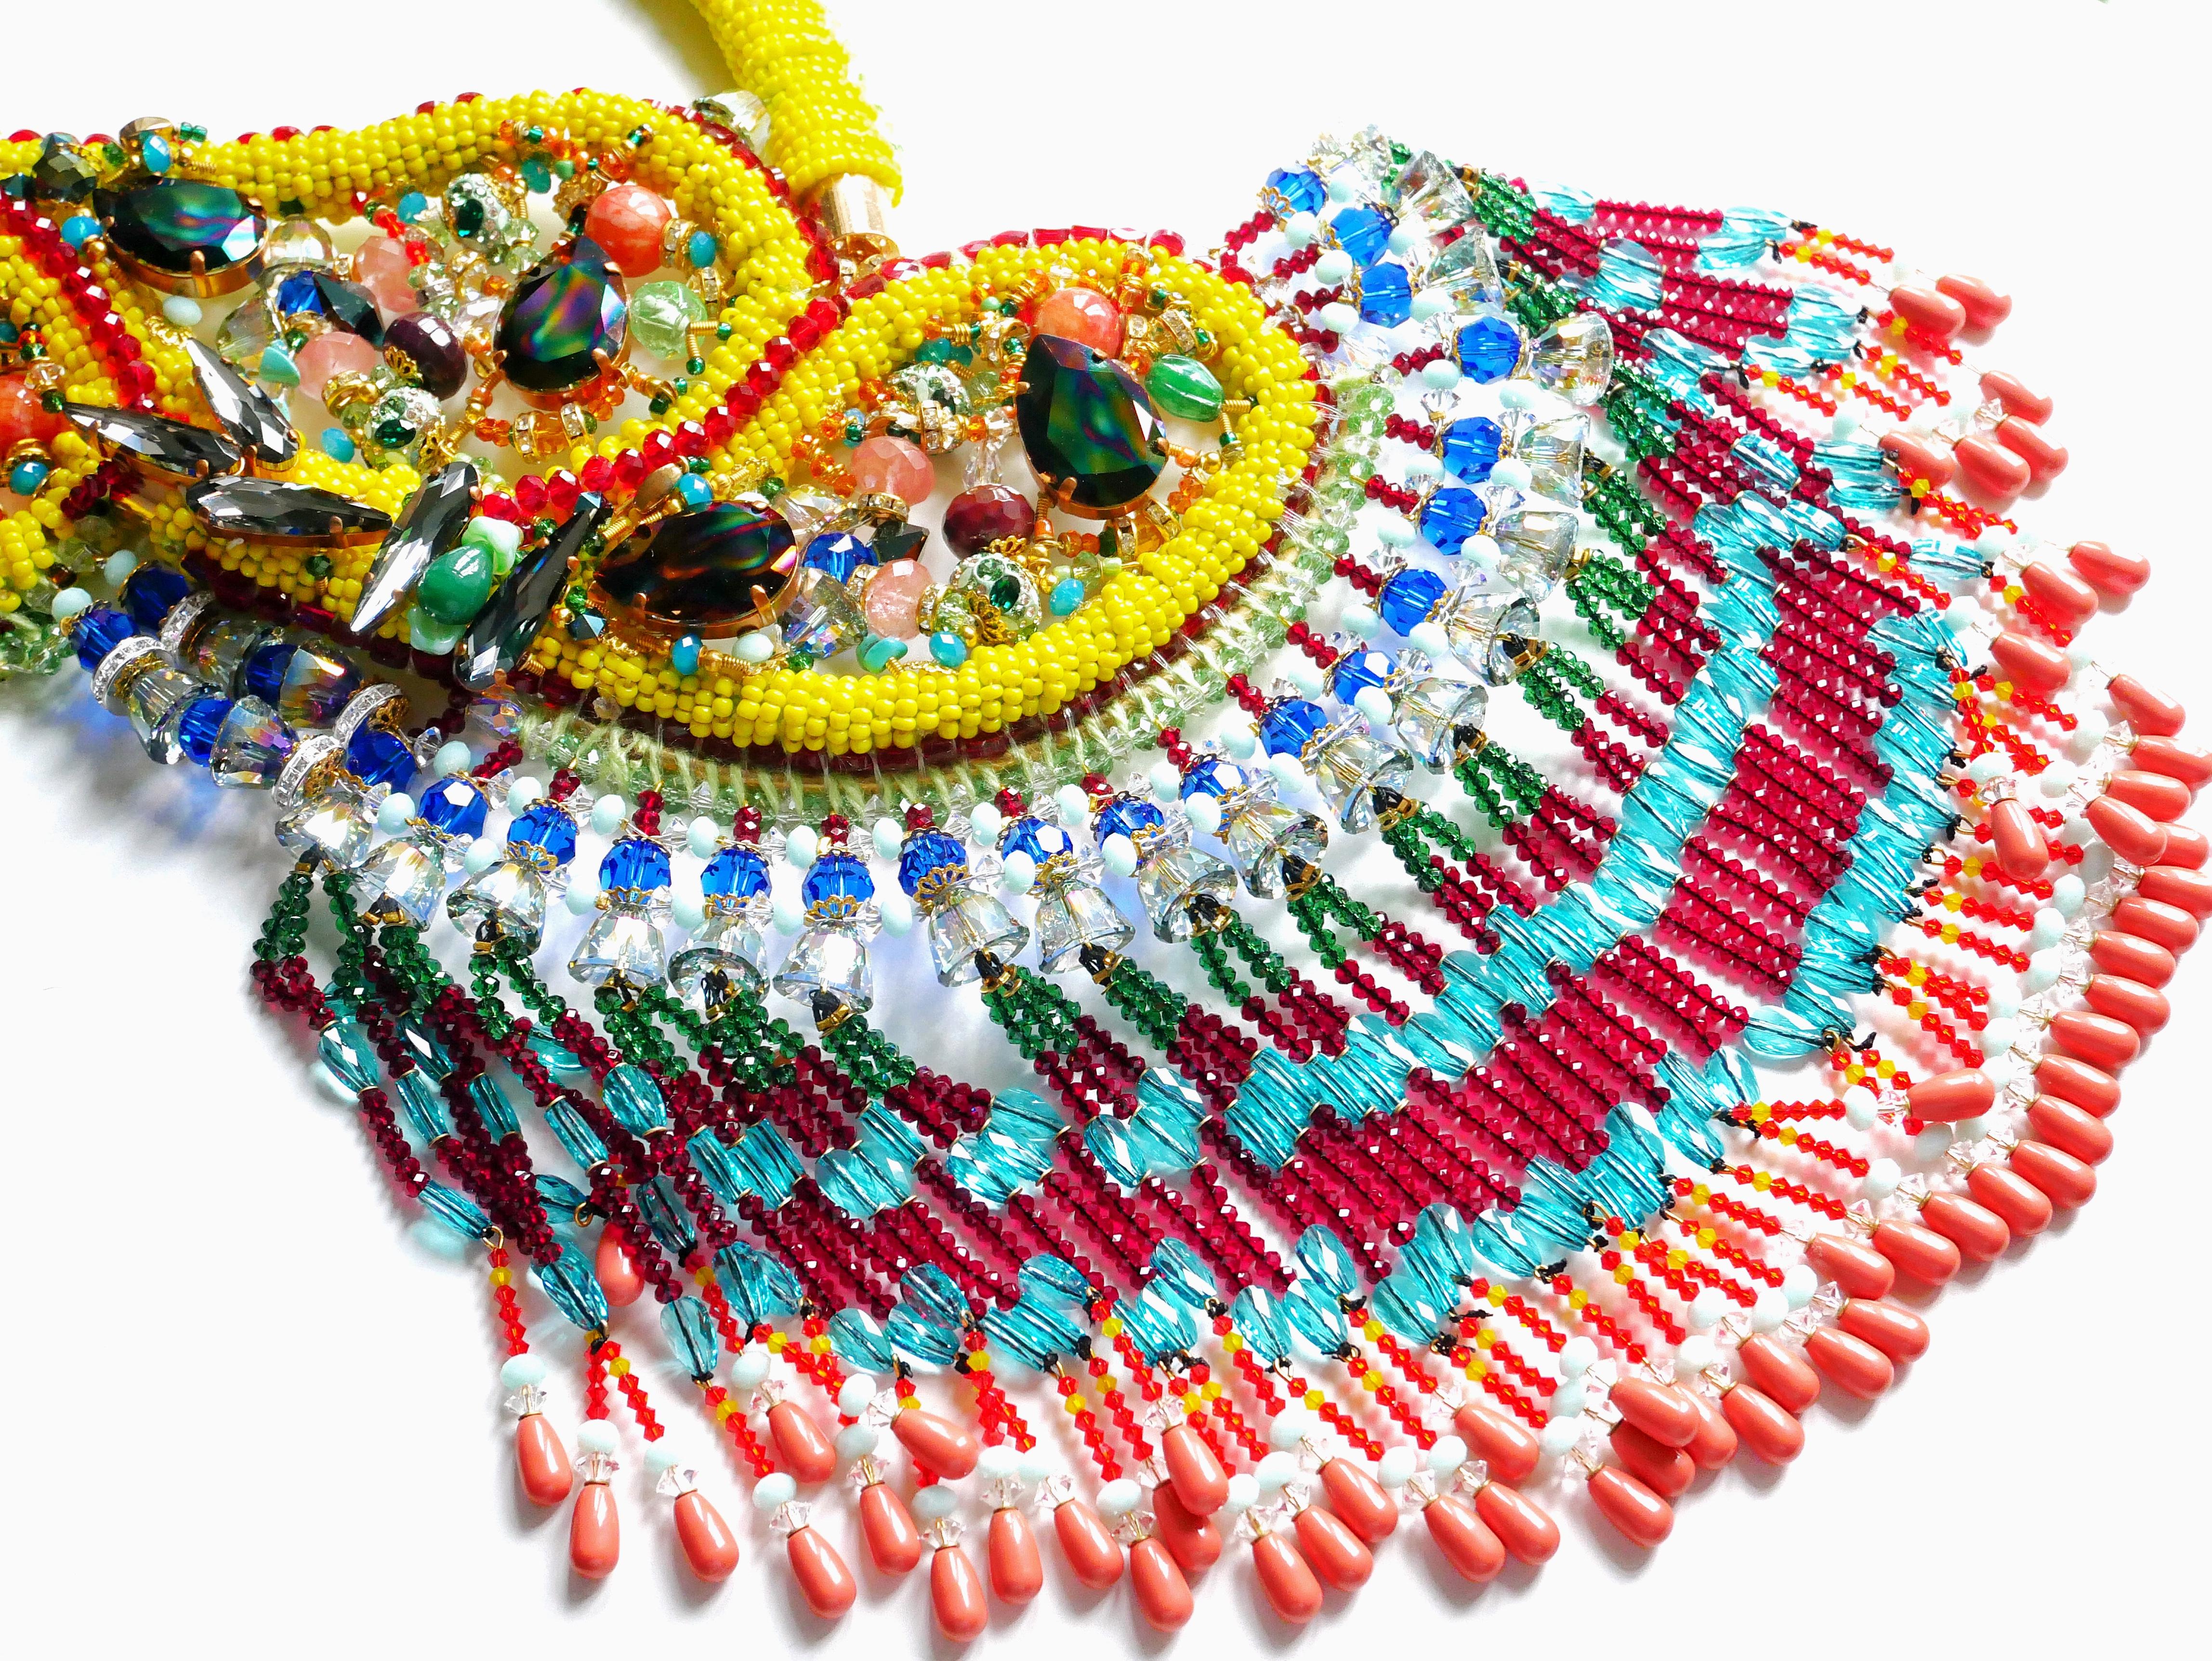 The Big Swarovski Crystal and Multi-Beaded Embellished Paisley Tassel Bib Necklace is a treasure and rare find. My intention for this design was to create a unique ageless wearable art that is extravagant, detailed, and has a fascinating story